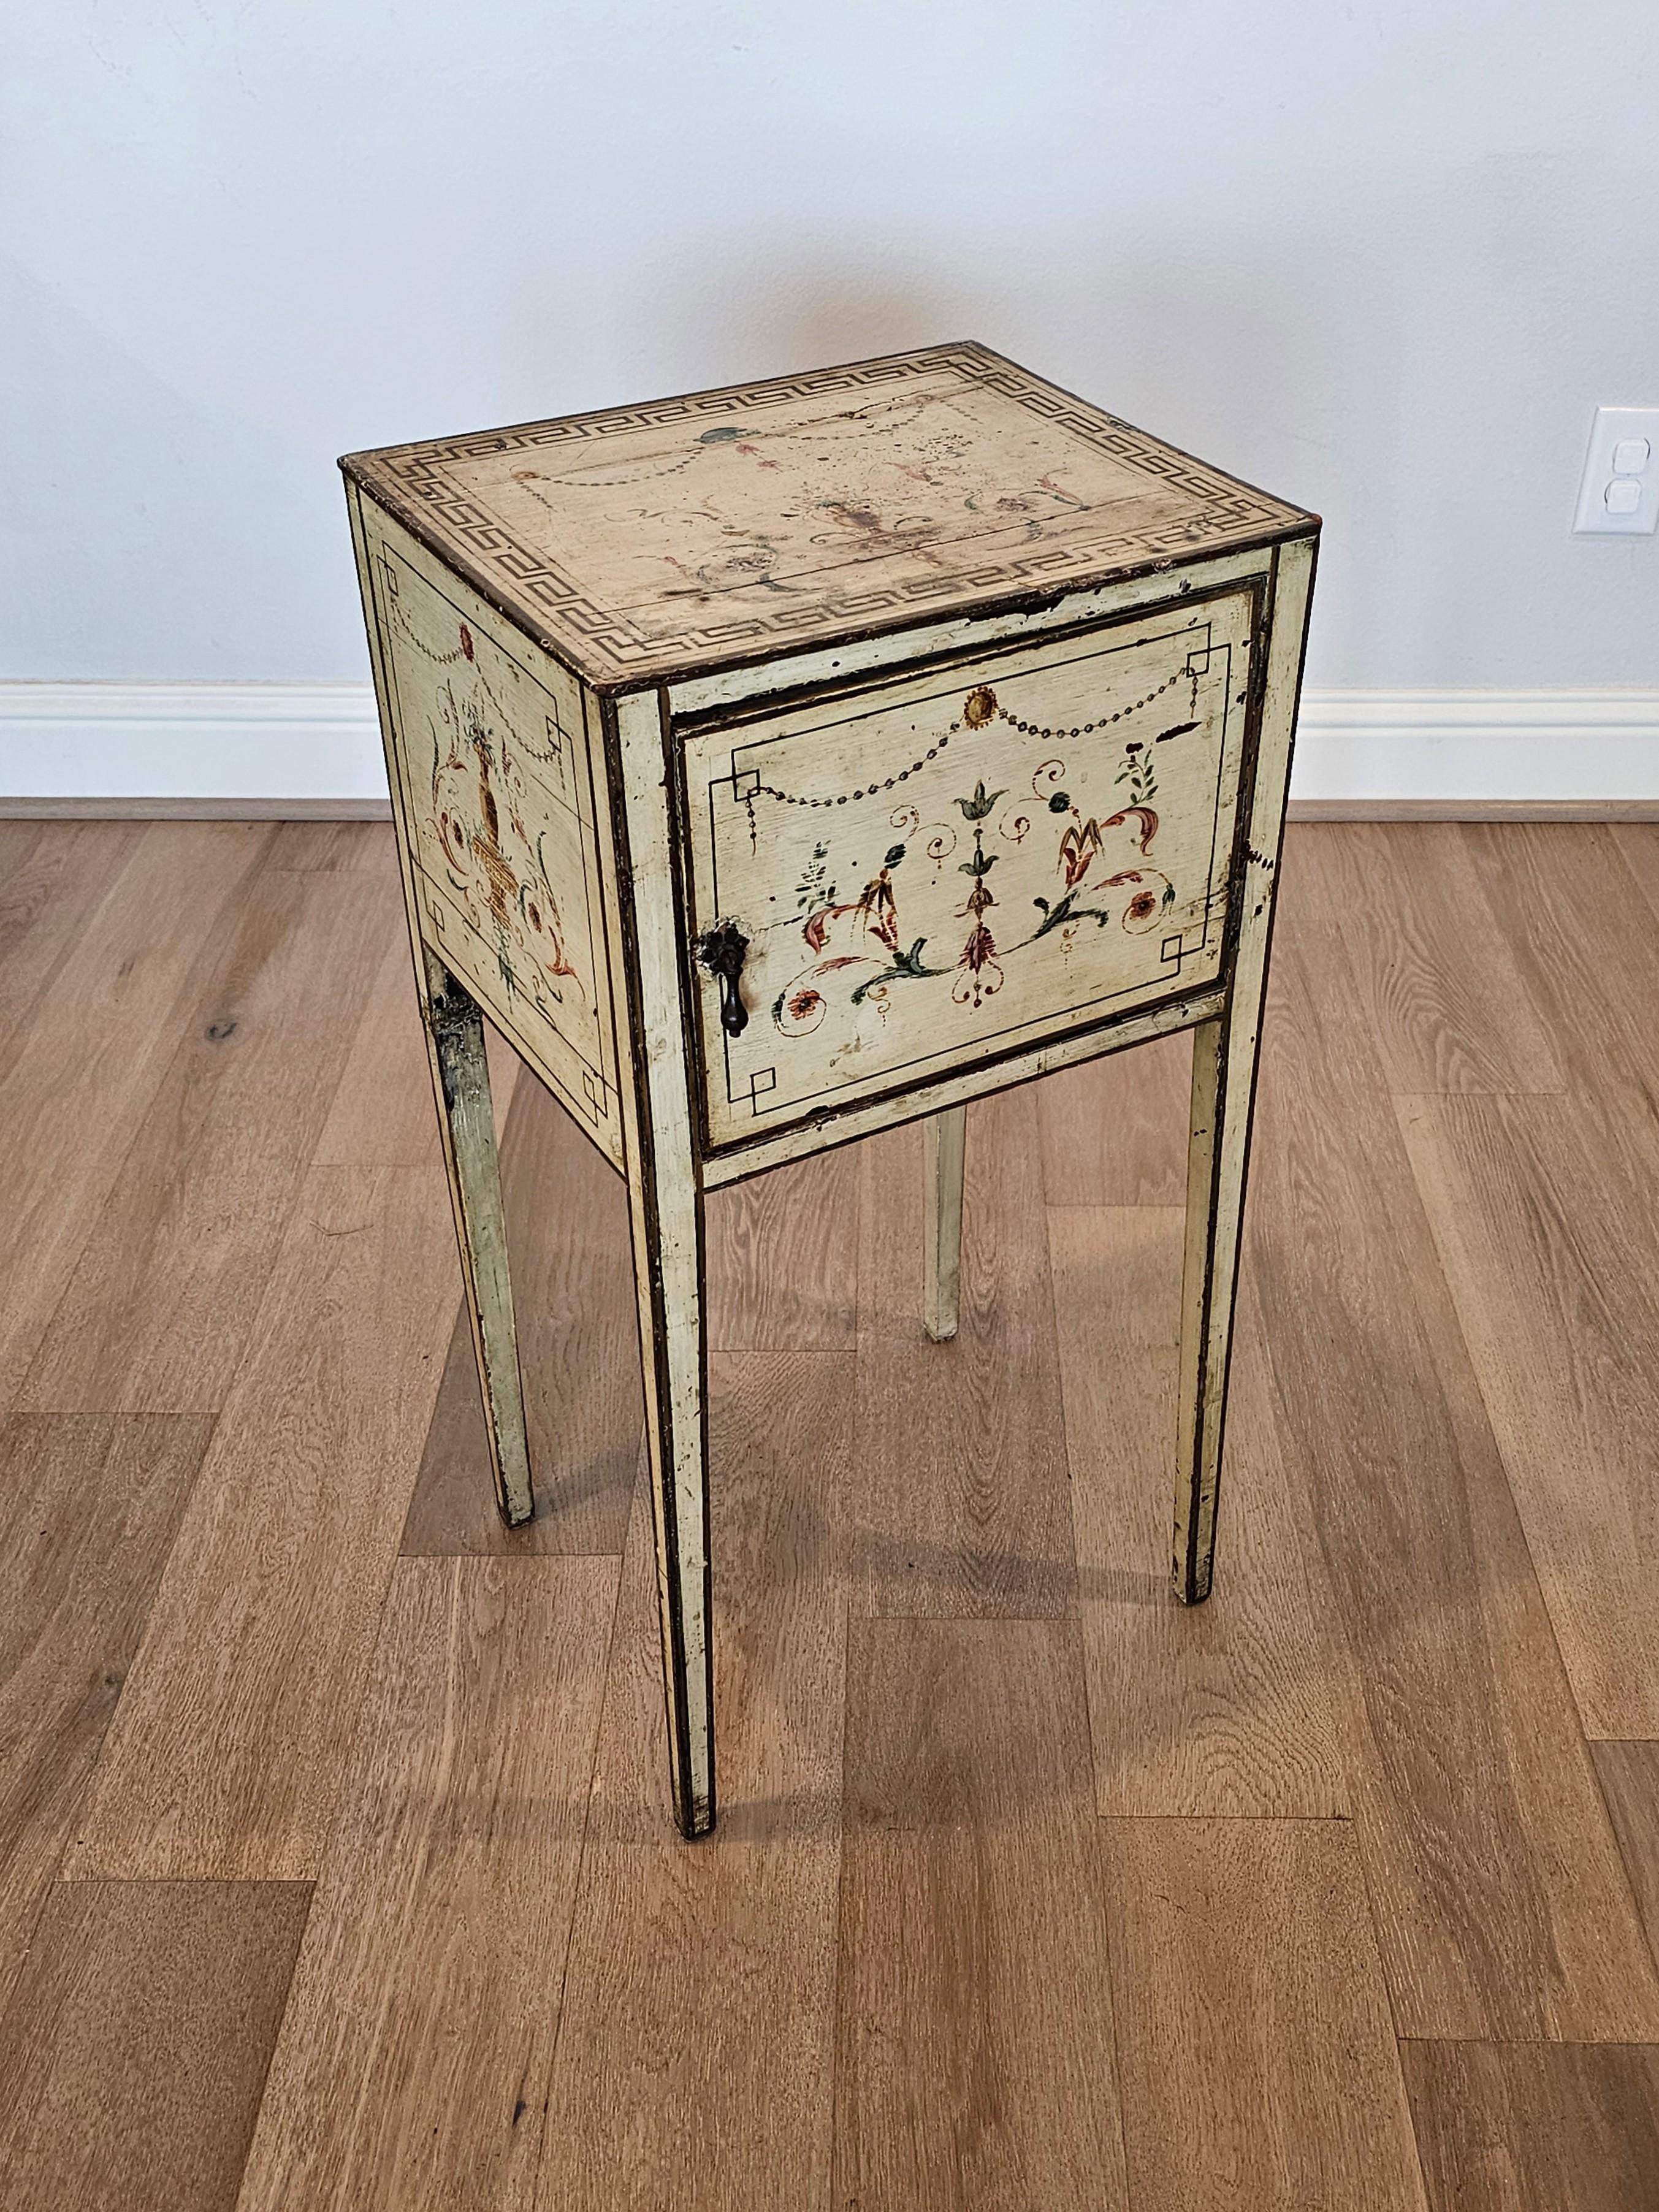 19th Century Italian Neo-classical Revival Hand-Painted Nightstand Table For Sale 6